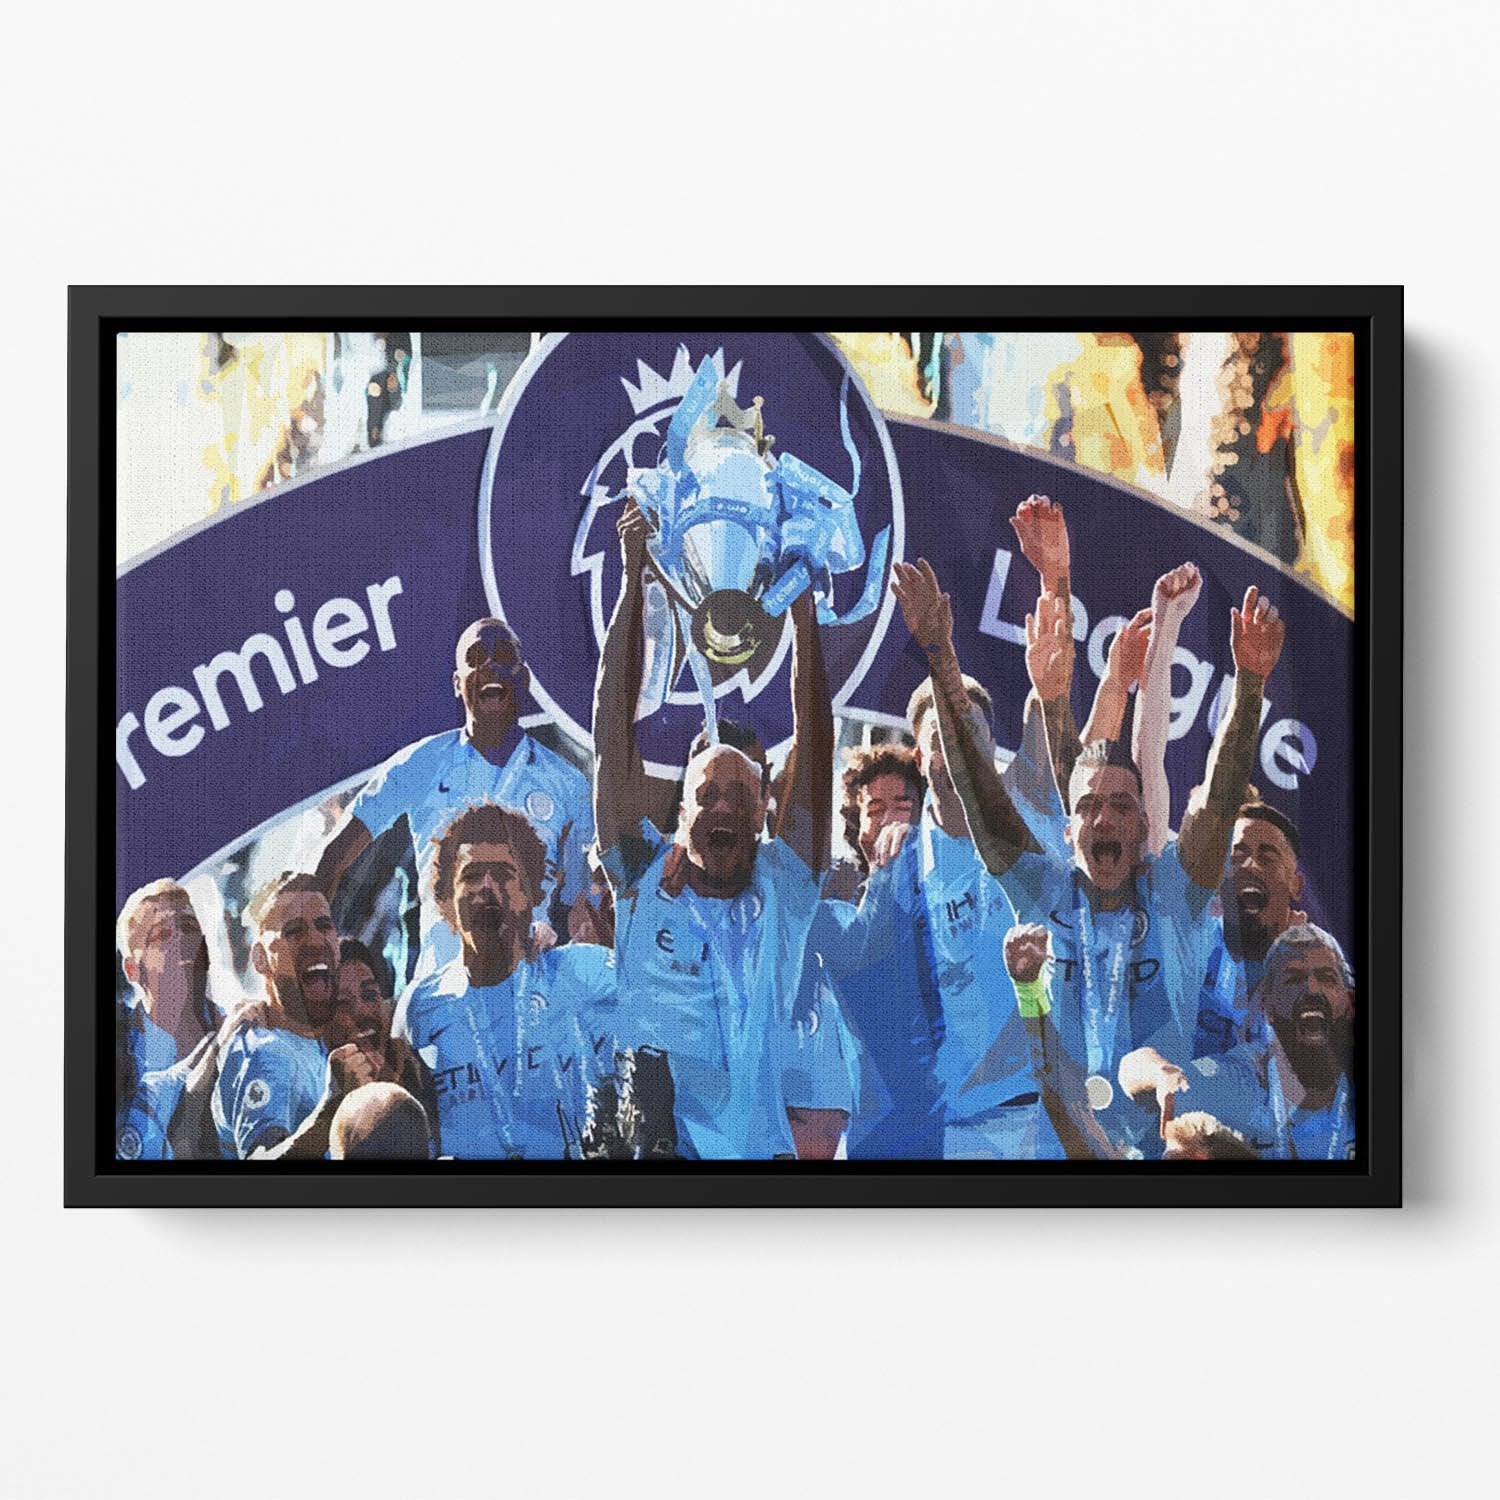 MANCHESTER CITY PREMIER LEAGUE WINNERS 2019 Floating Framed Canvas